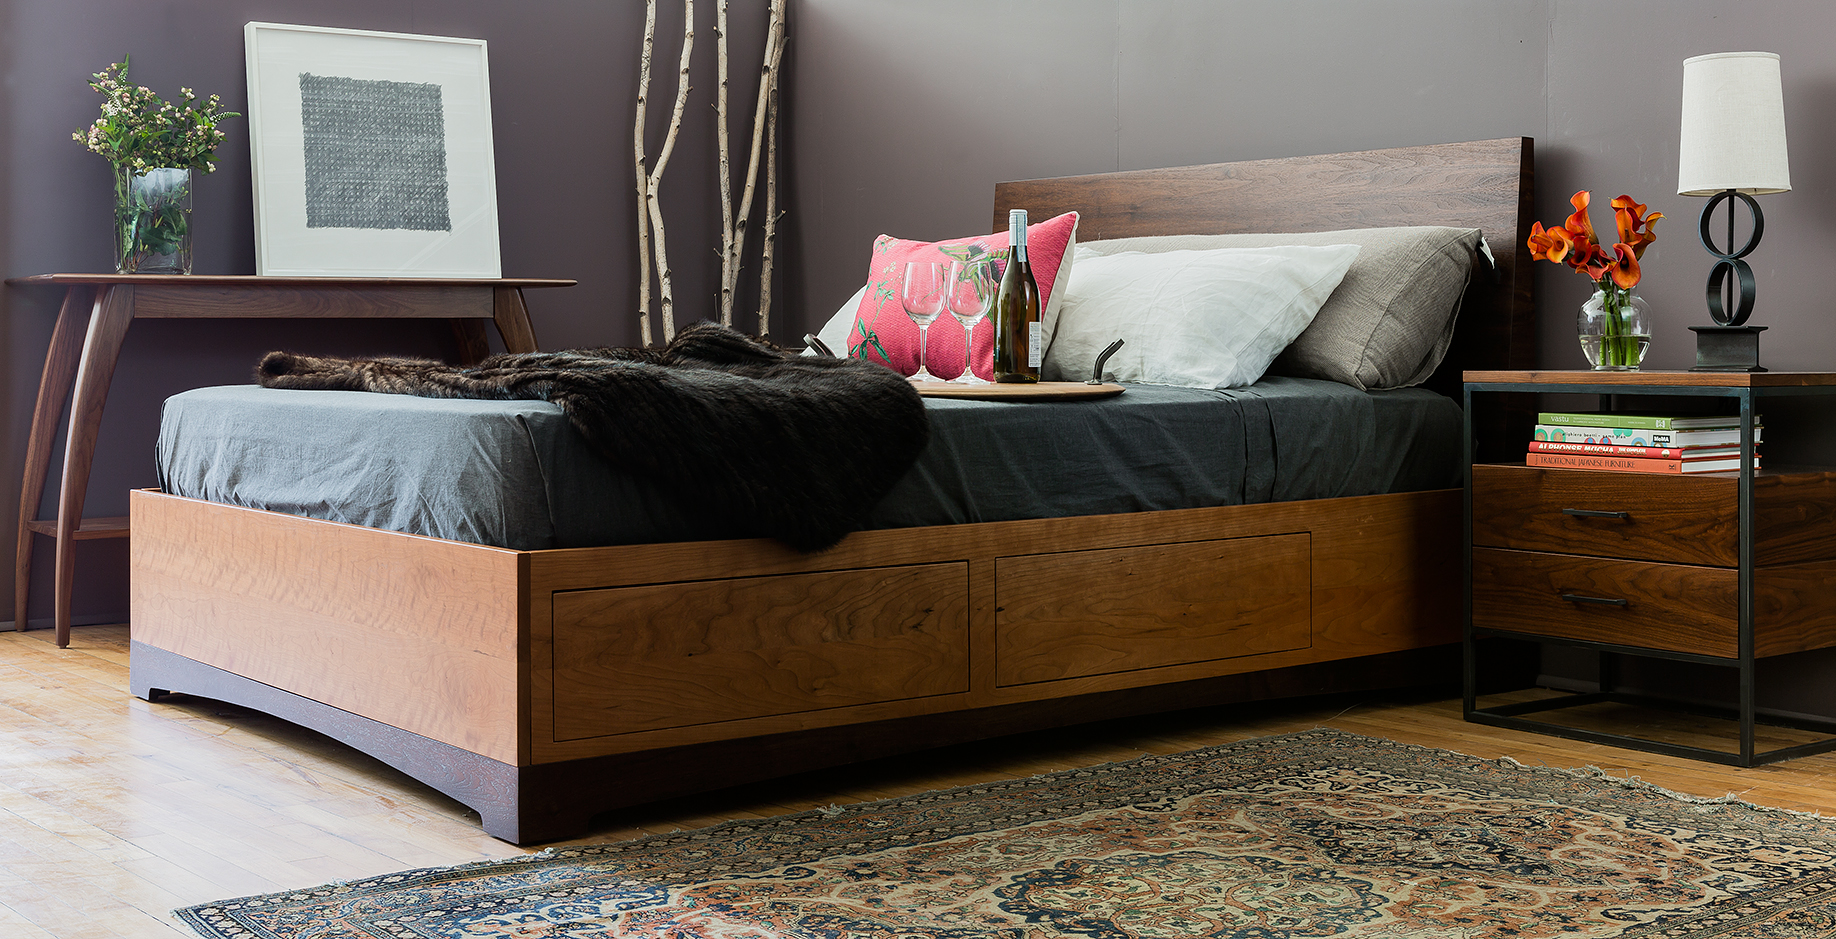  Eastern Console shown in walnut, the Modern Storage Bed in cherry and walnut, queen size &amp; custom steel nightstand. 